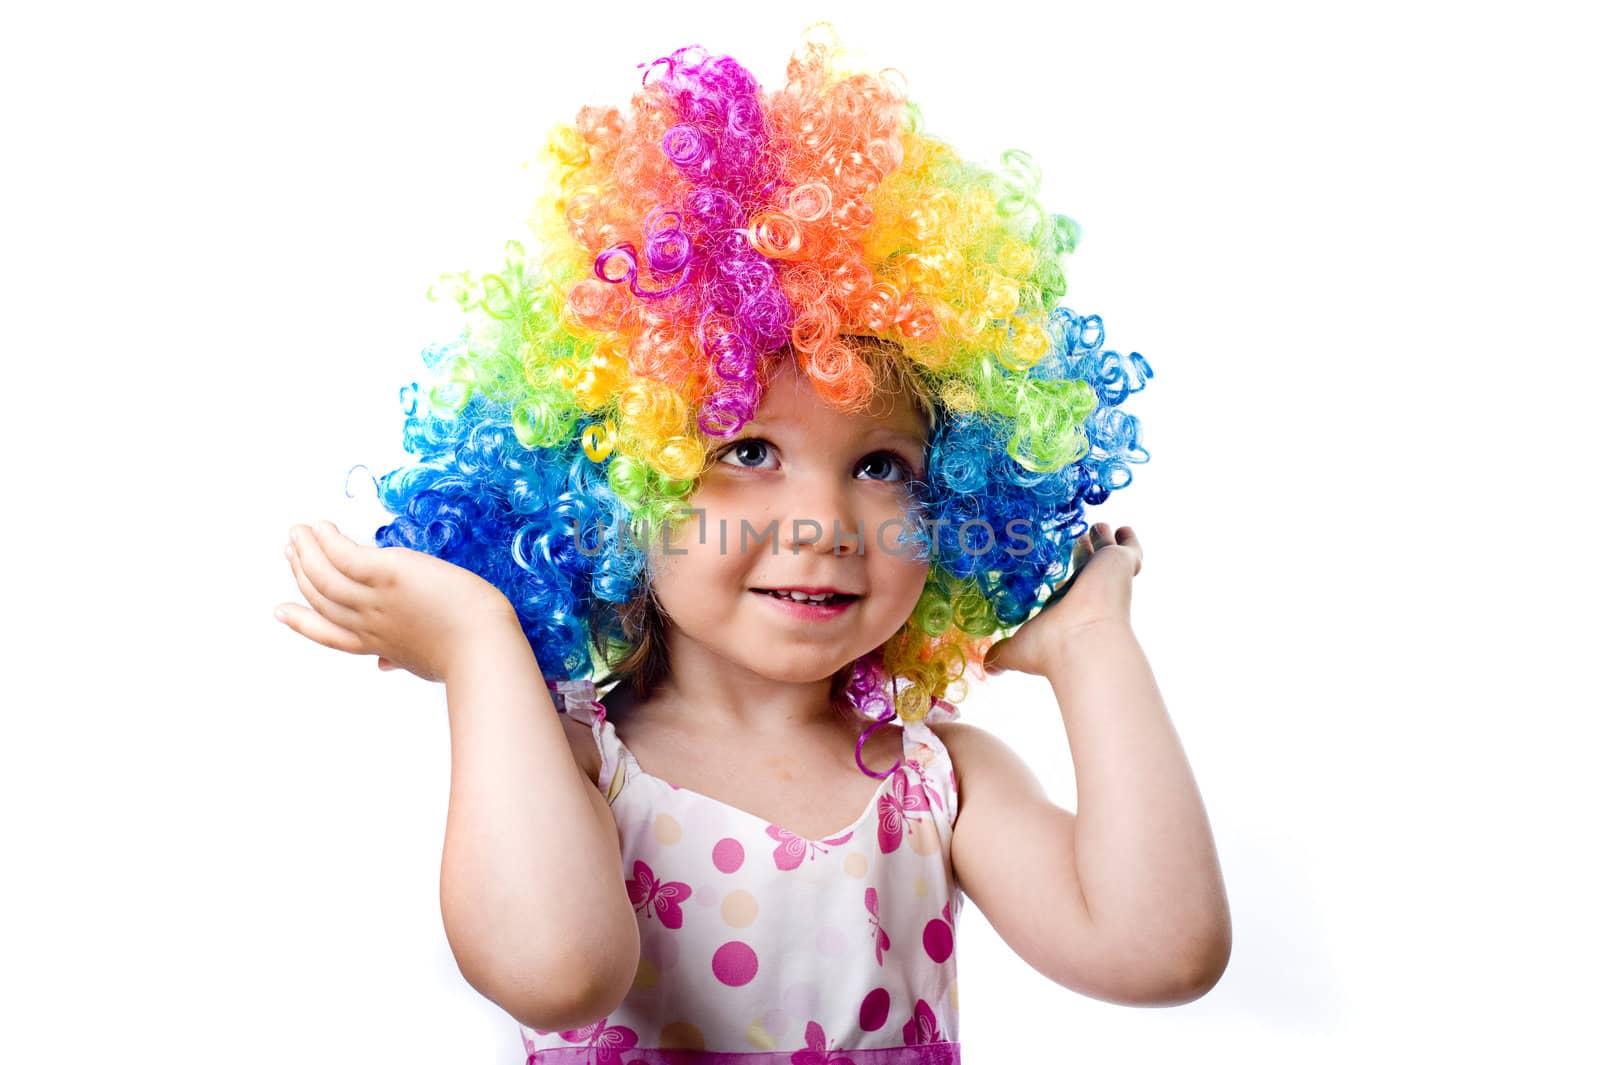 little girl in colourfull hair portrait. Lot of happy, lot of fun, great for commercial.